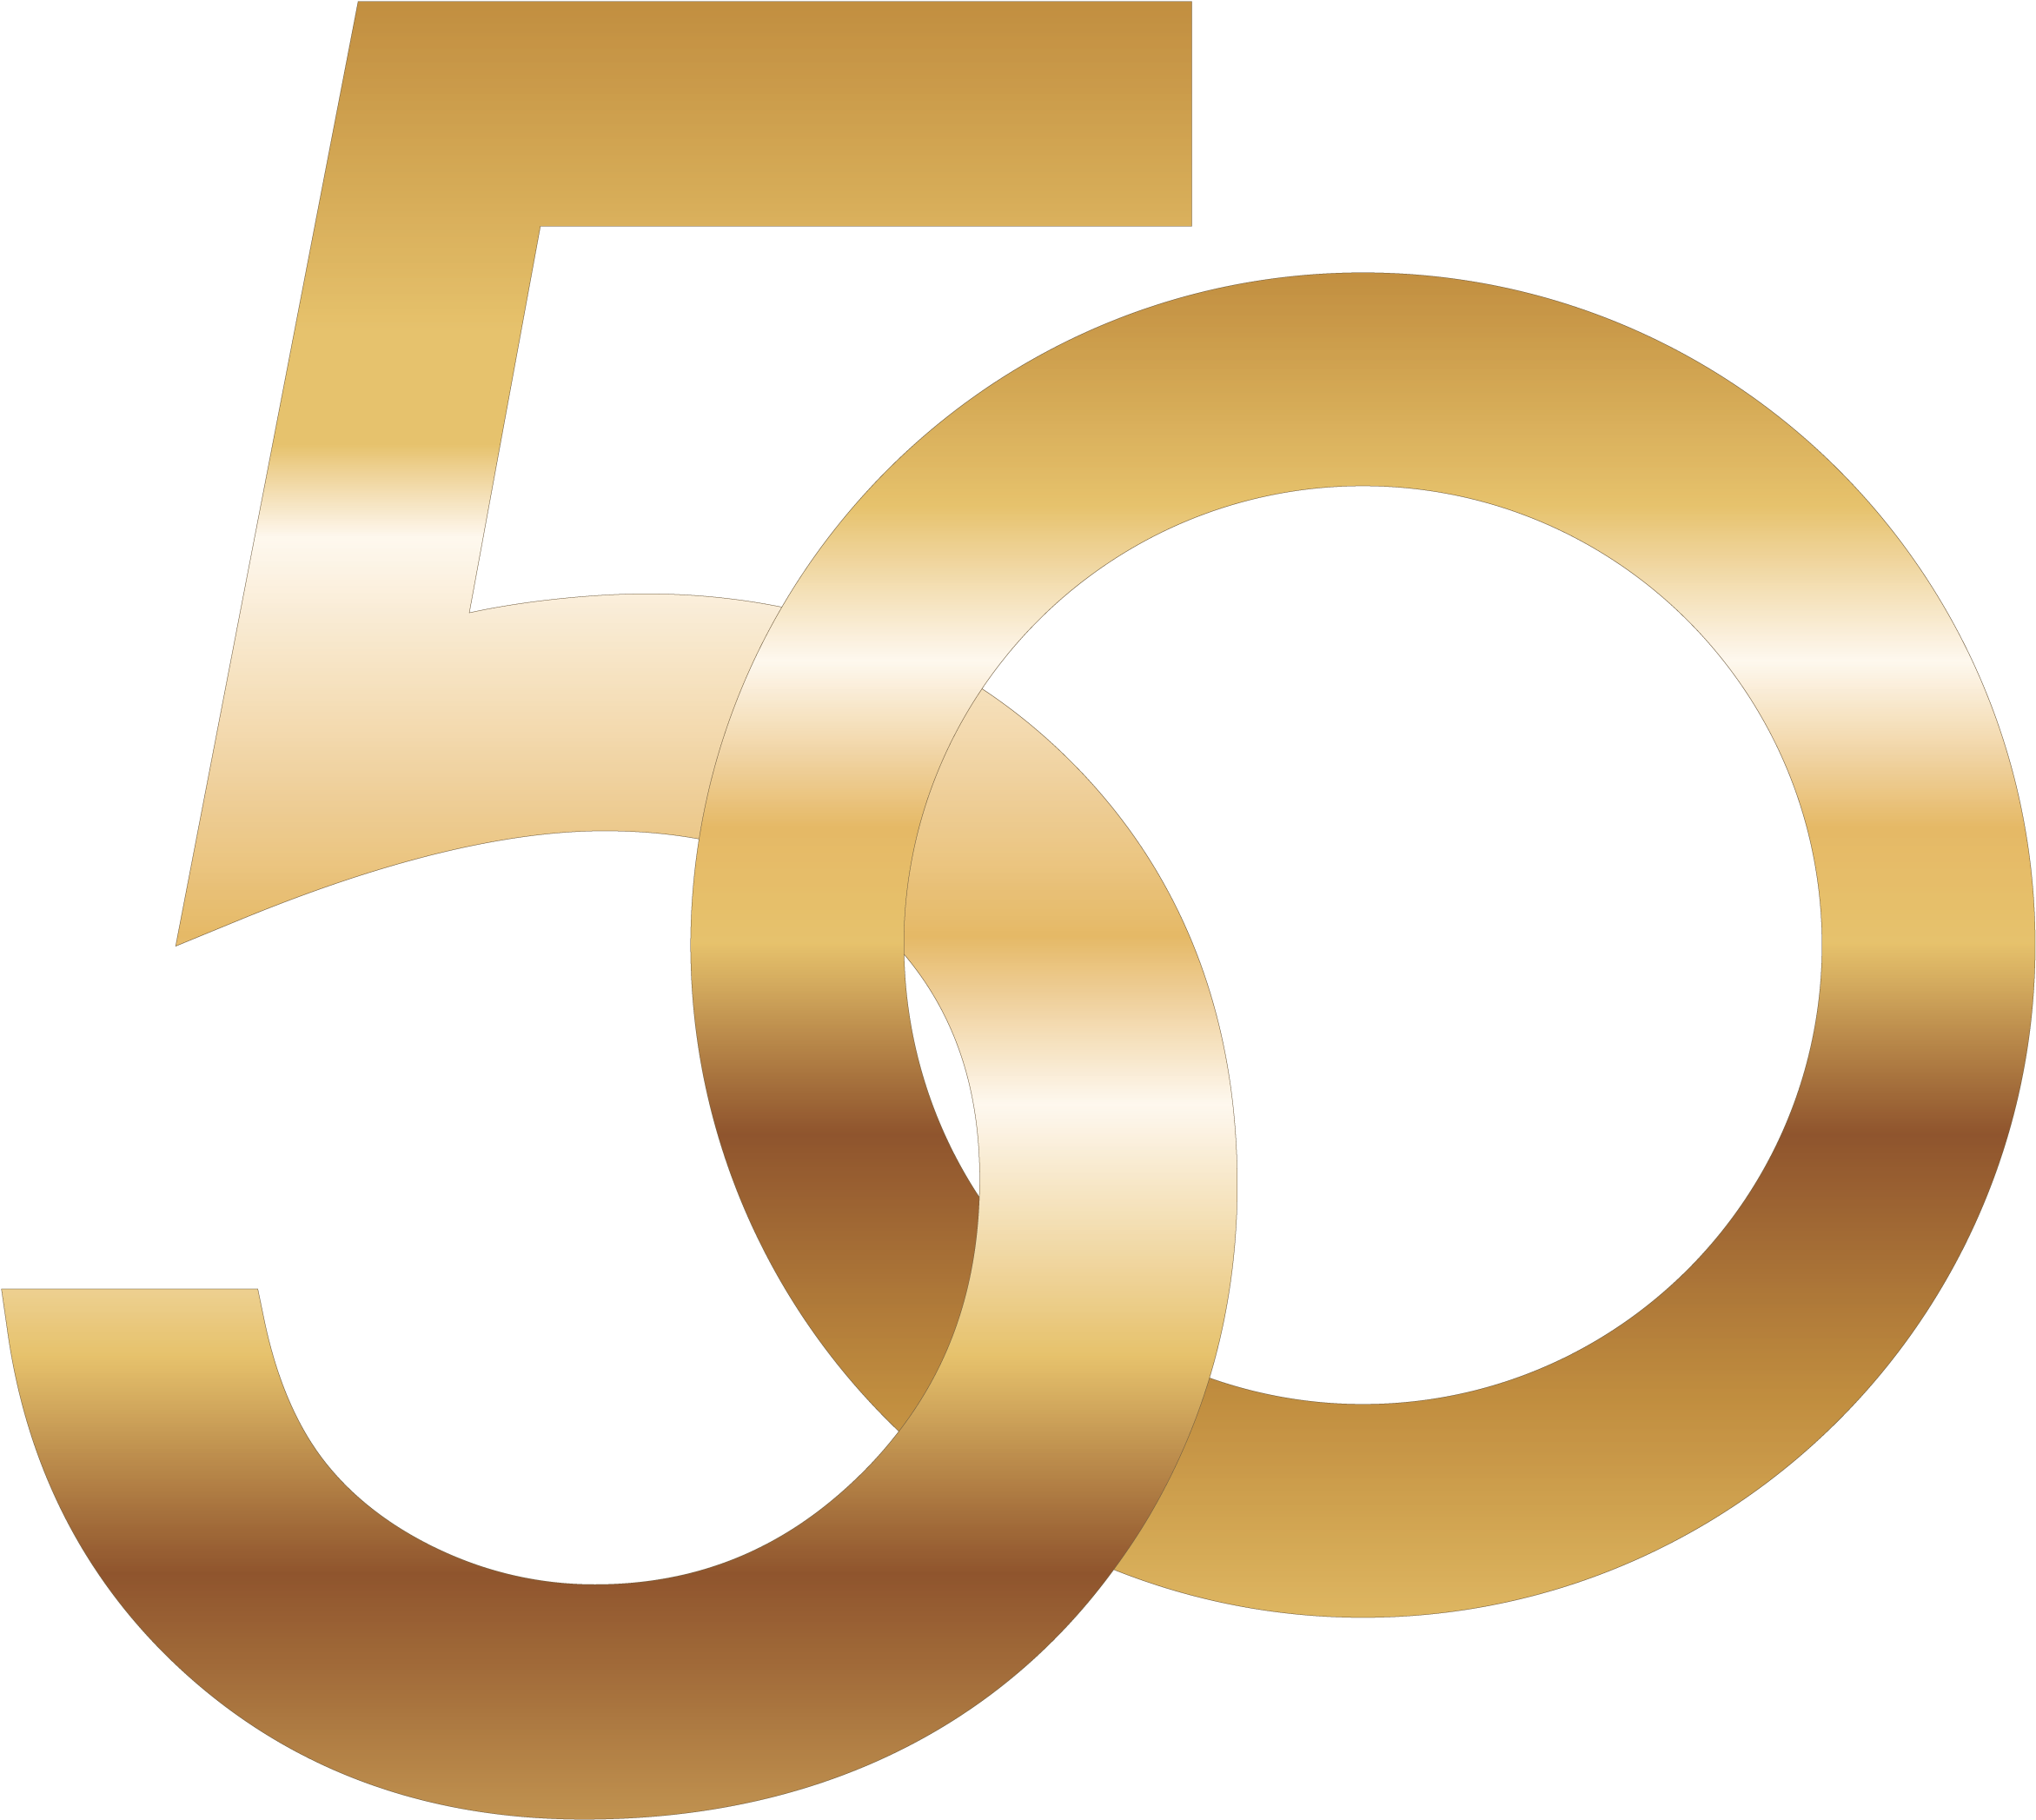 50 Number Free Photo PNG Image